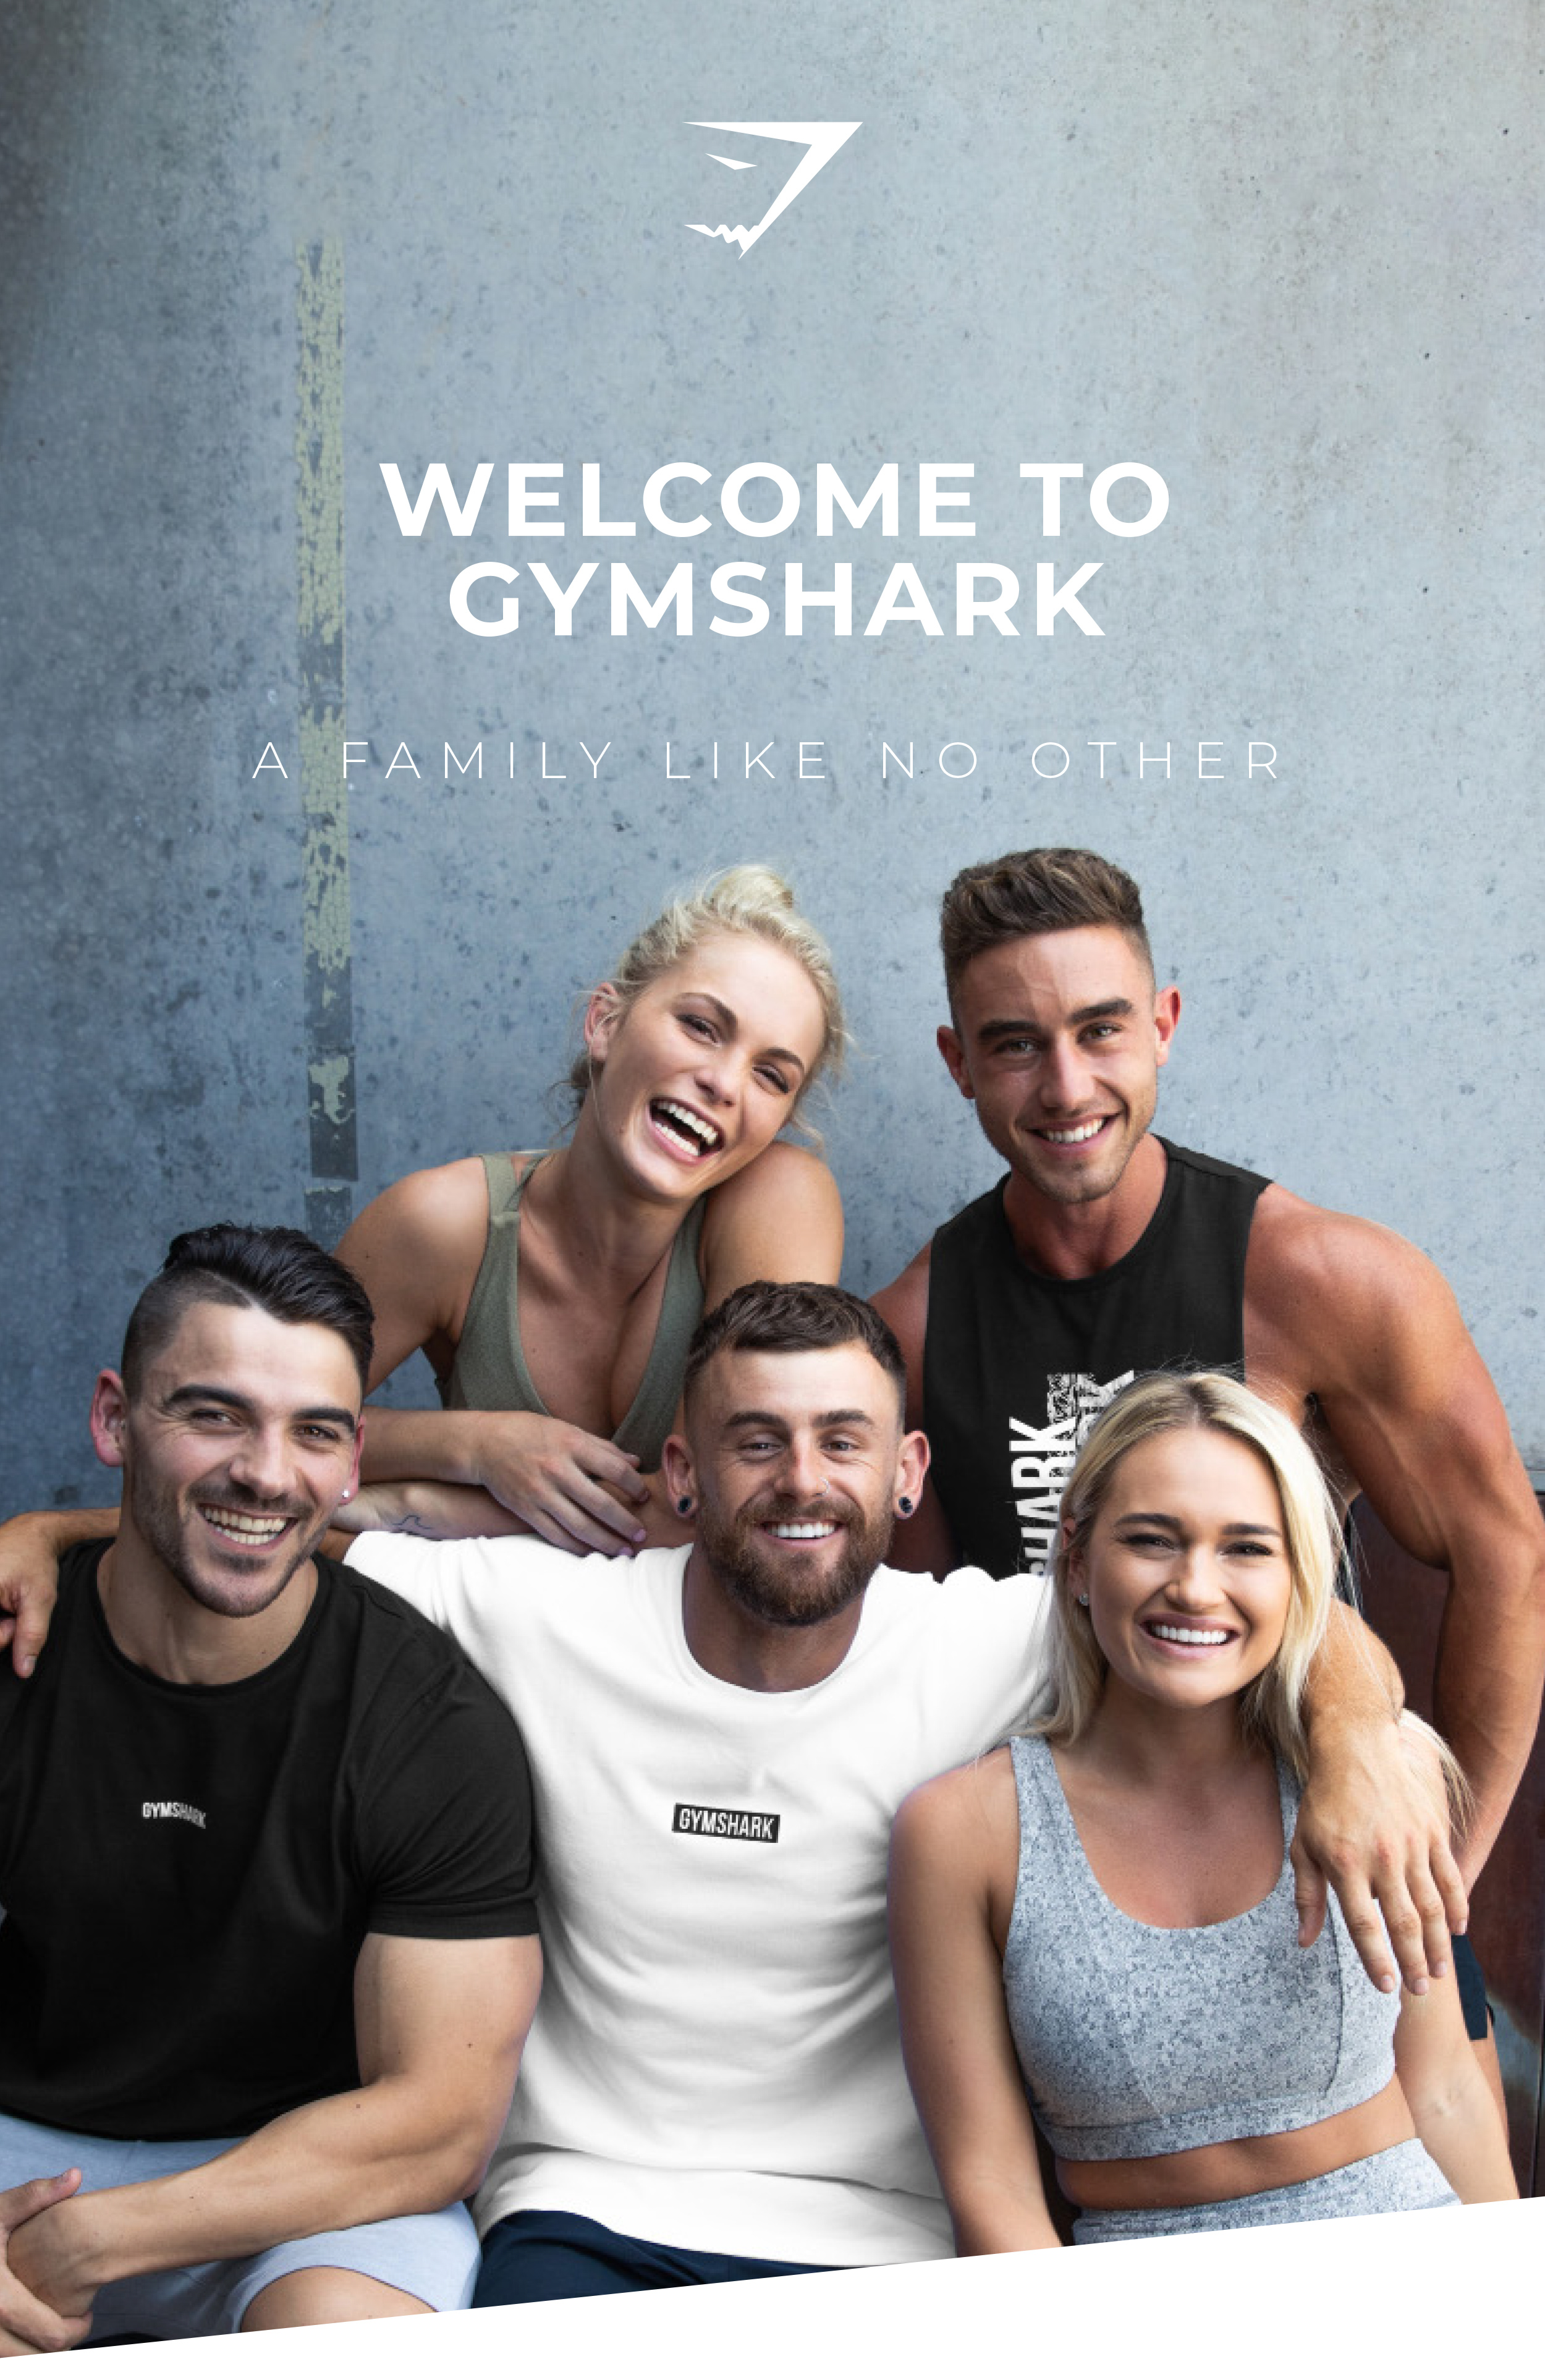 Welcome to Gymshark!